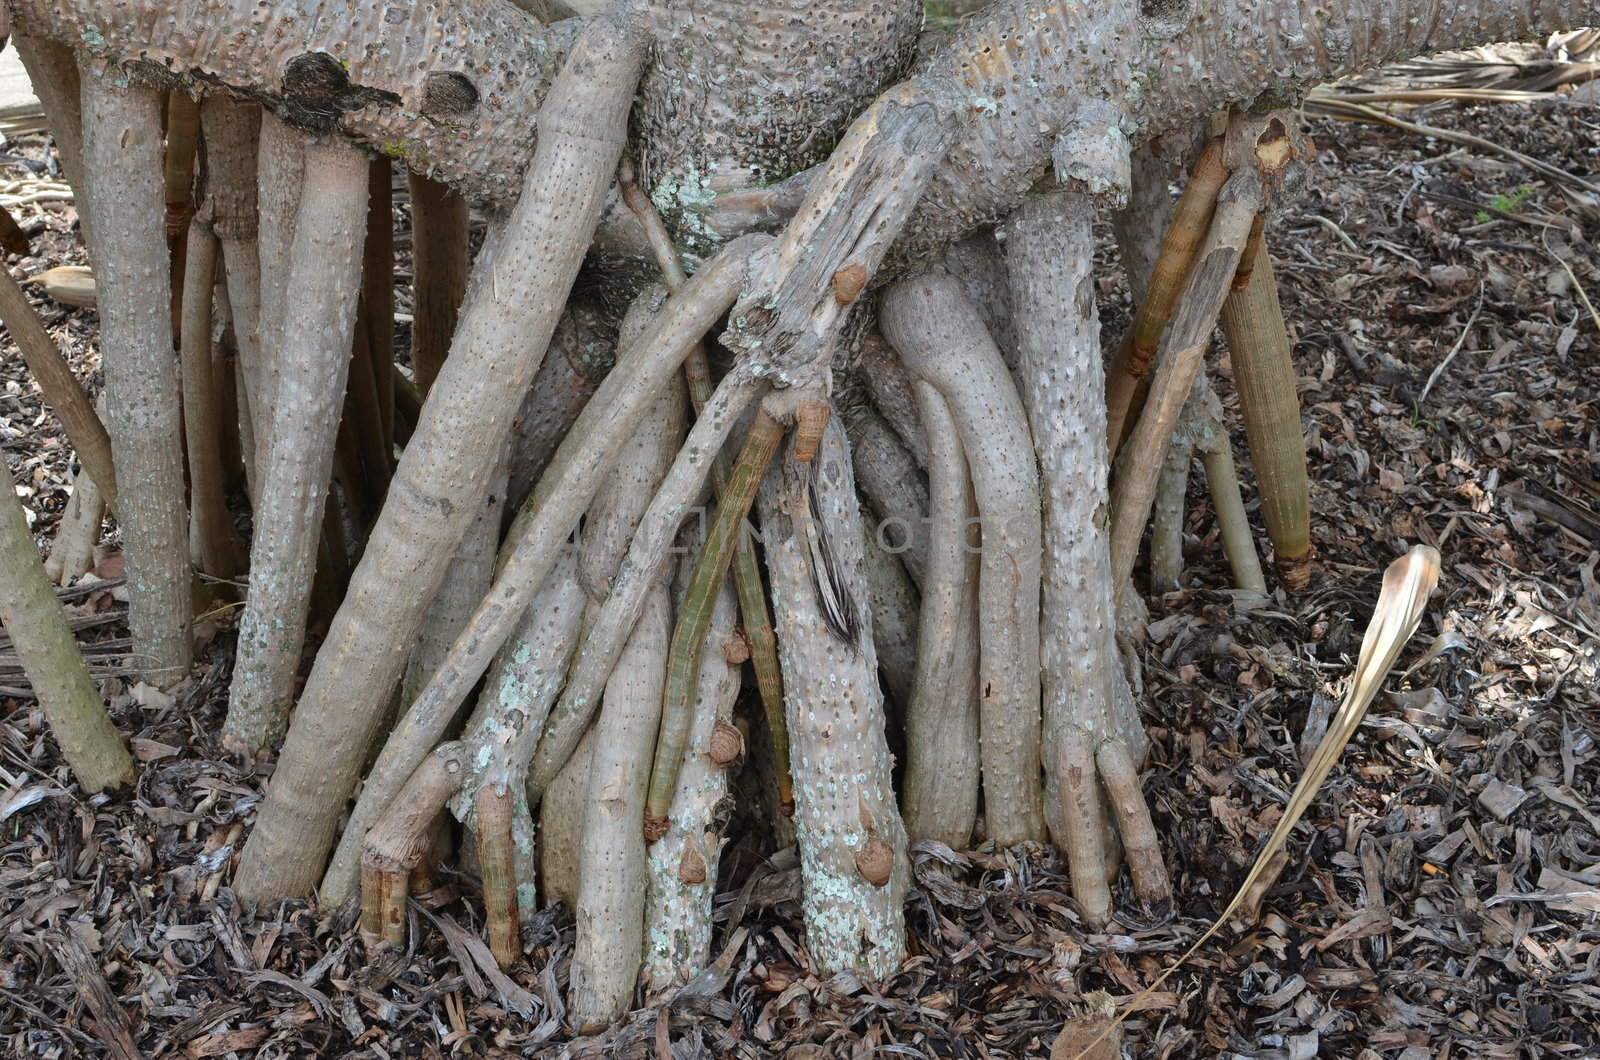 Exposed and tangled roots of a mature Pandanus Palm. The photo was taken at Caloundra on Queensland's Sunshine Coast.